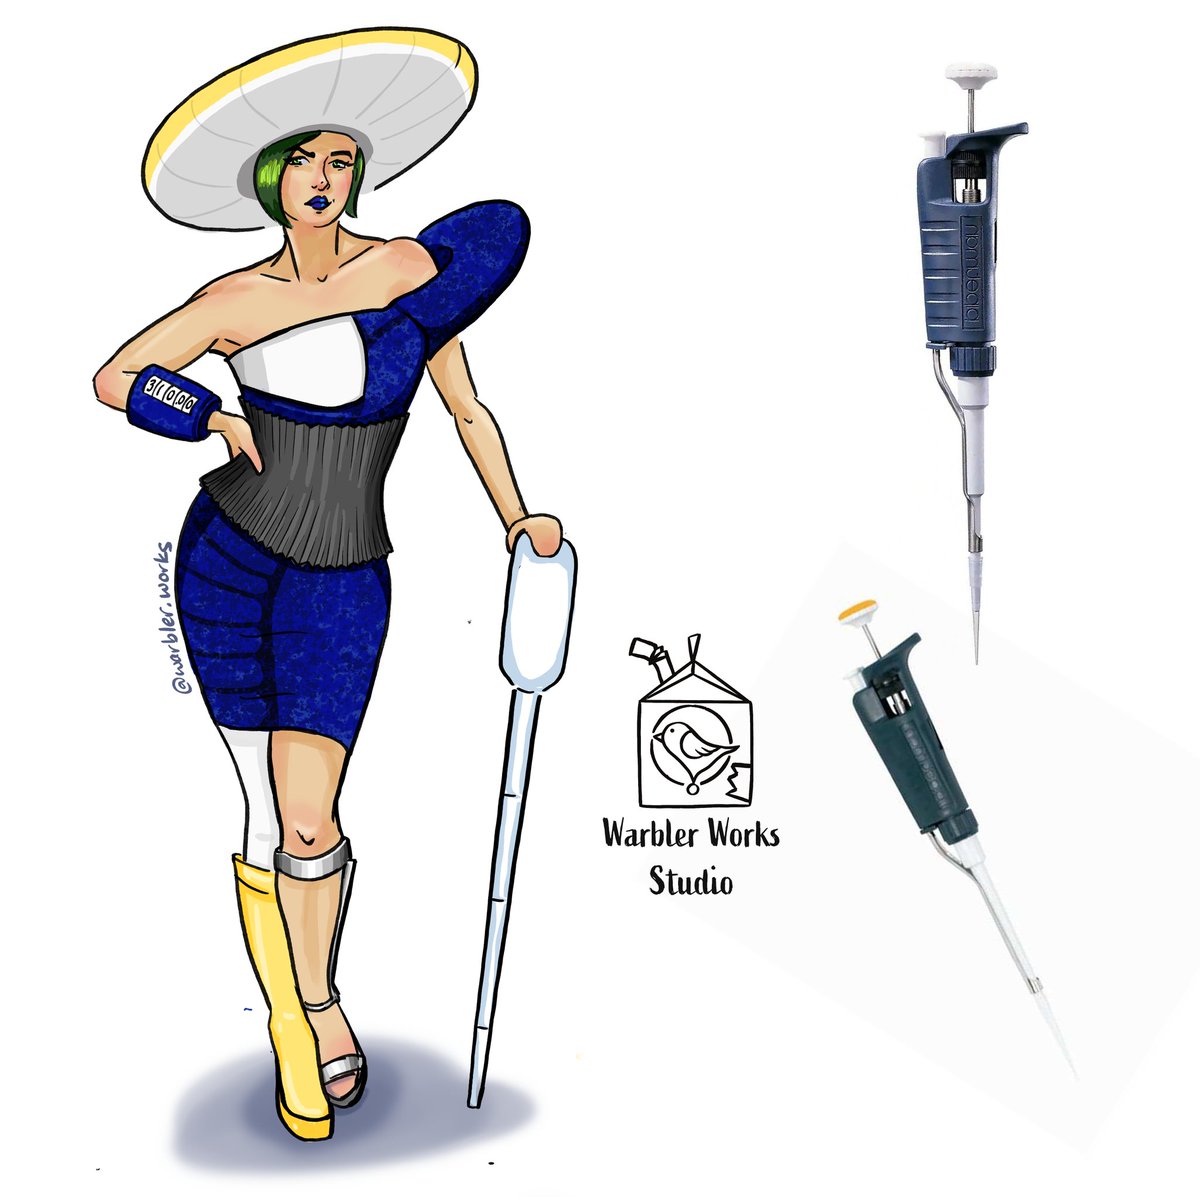 Lab, but make it fashion: Part 8. Pipette. 
She's giving me old western, mushroom lady vibes....and now I can't unsee it. You're welcome.
#medicallaboratoryscientist #lab4life #lablife #labvocate #loveforlabpros #laboratory #laboratorylife #lab #sciencefashion #labfashion